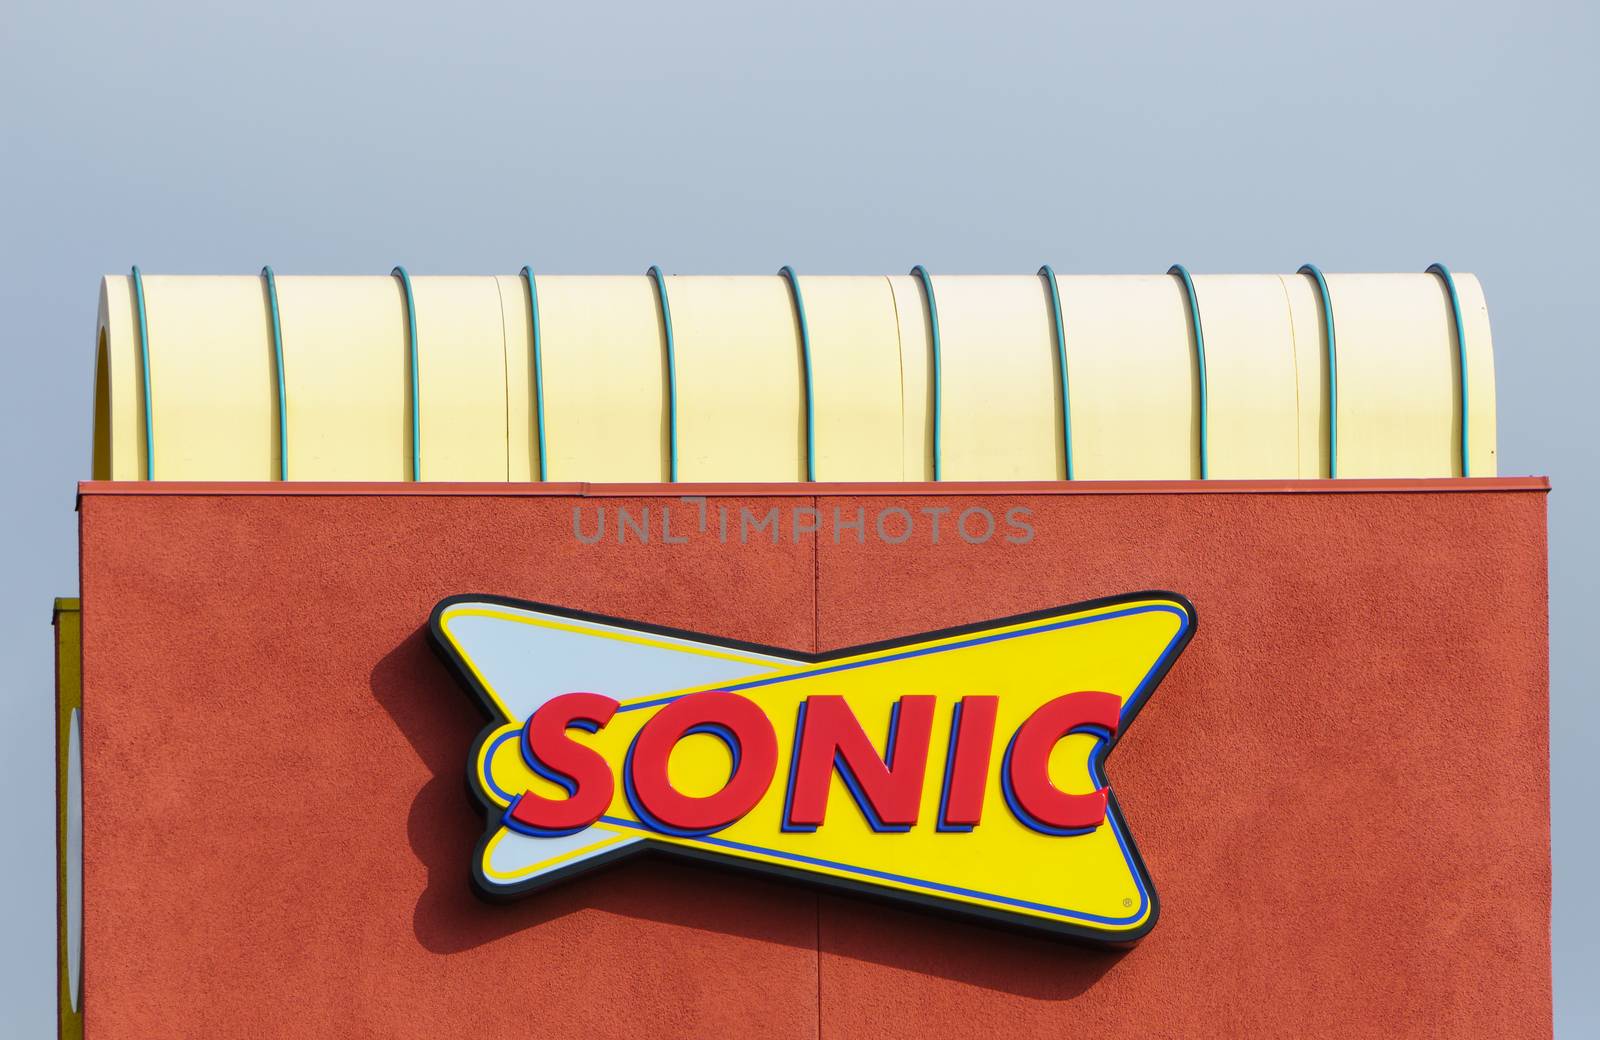 COSTA MESA, CA/USA - OCTOBER 17, 2015: Sonic Drive-In Restaurant exterior. Sonic Corp. is an American drive-in fast-food restaurant chain.